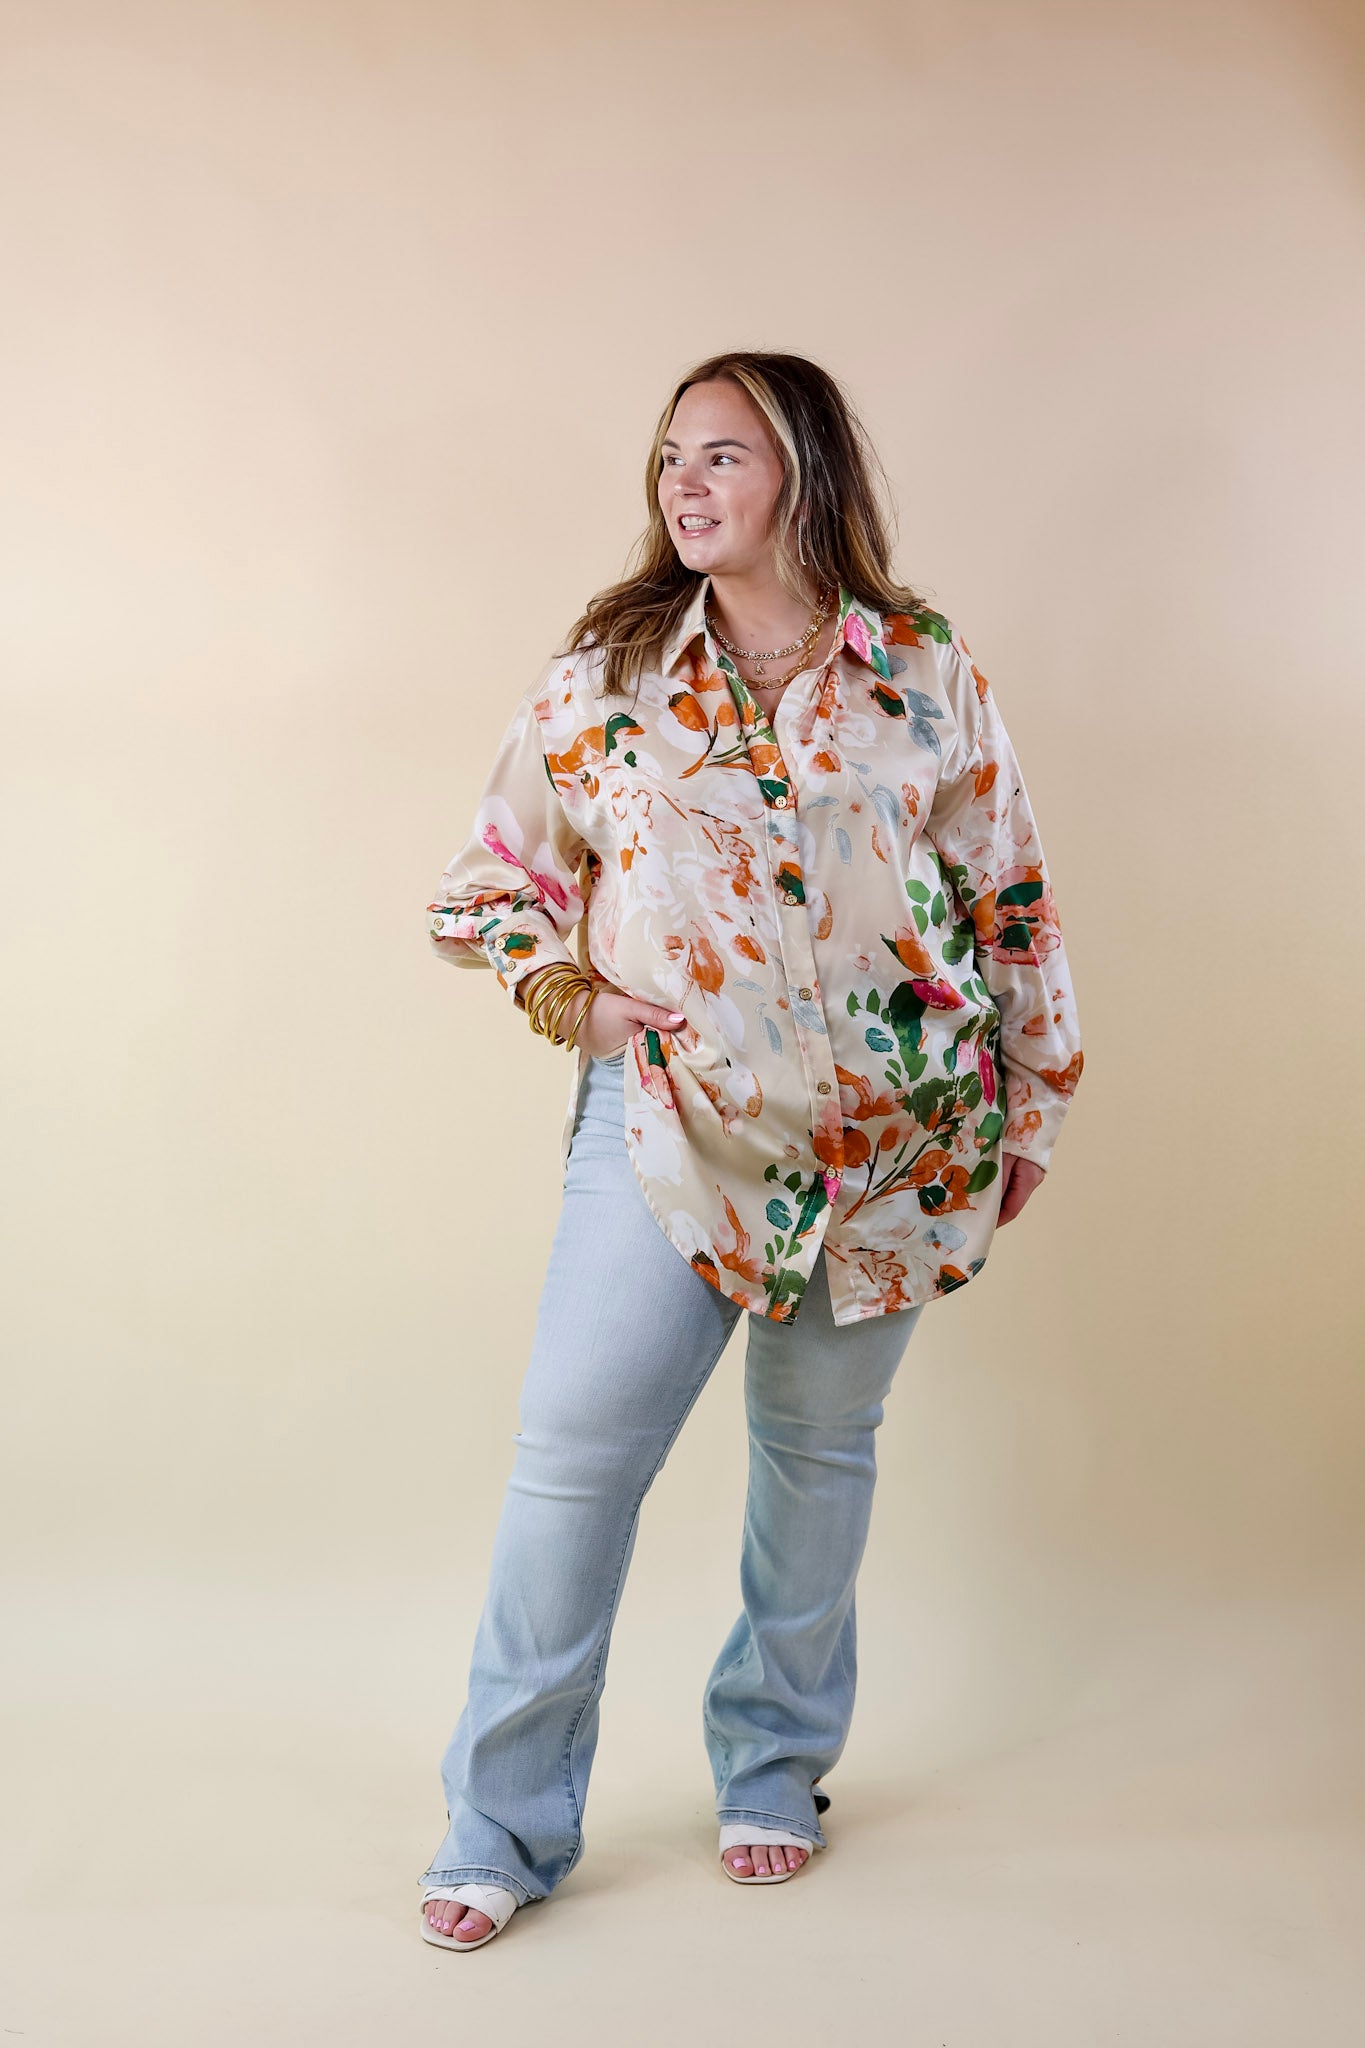 Tell Me Something Good Floral Long Sleeve Button Up Top in Beige - Giddy Up Glamour Boutique